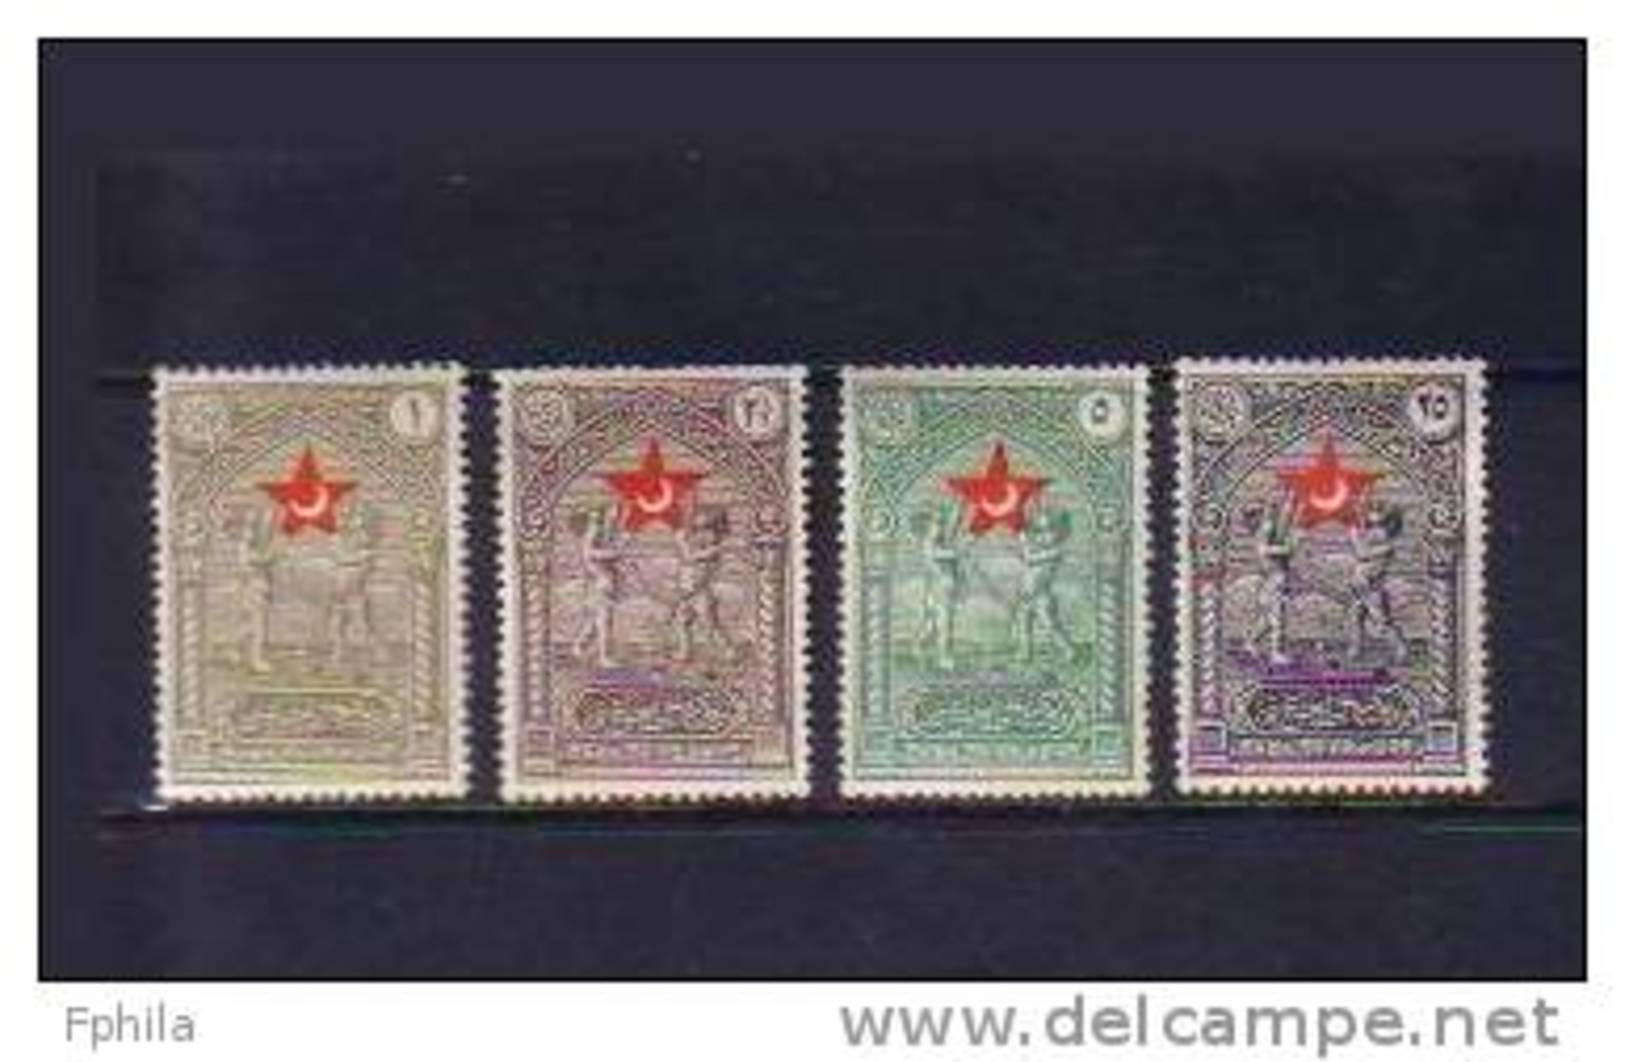 1928 TURKEY STAMPS IN AID OF THE TURKISH SOCIETY FOR THE PROTECTION OF CHILDREN MINT WITHOUT GUM - Charity Stamps